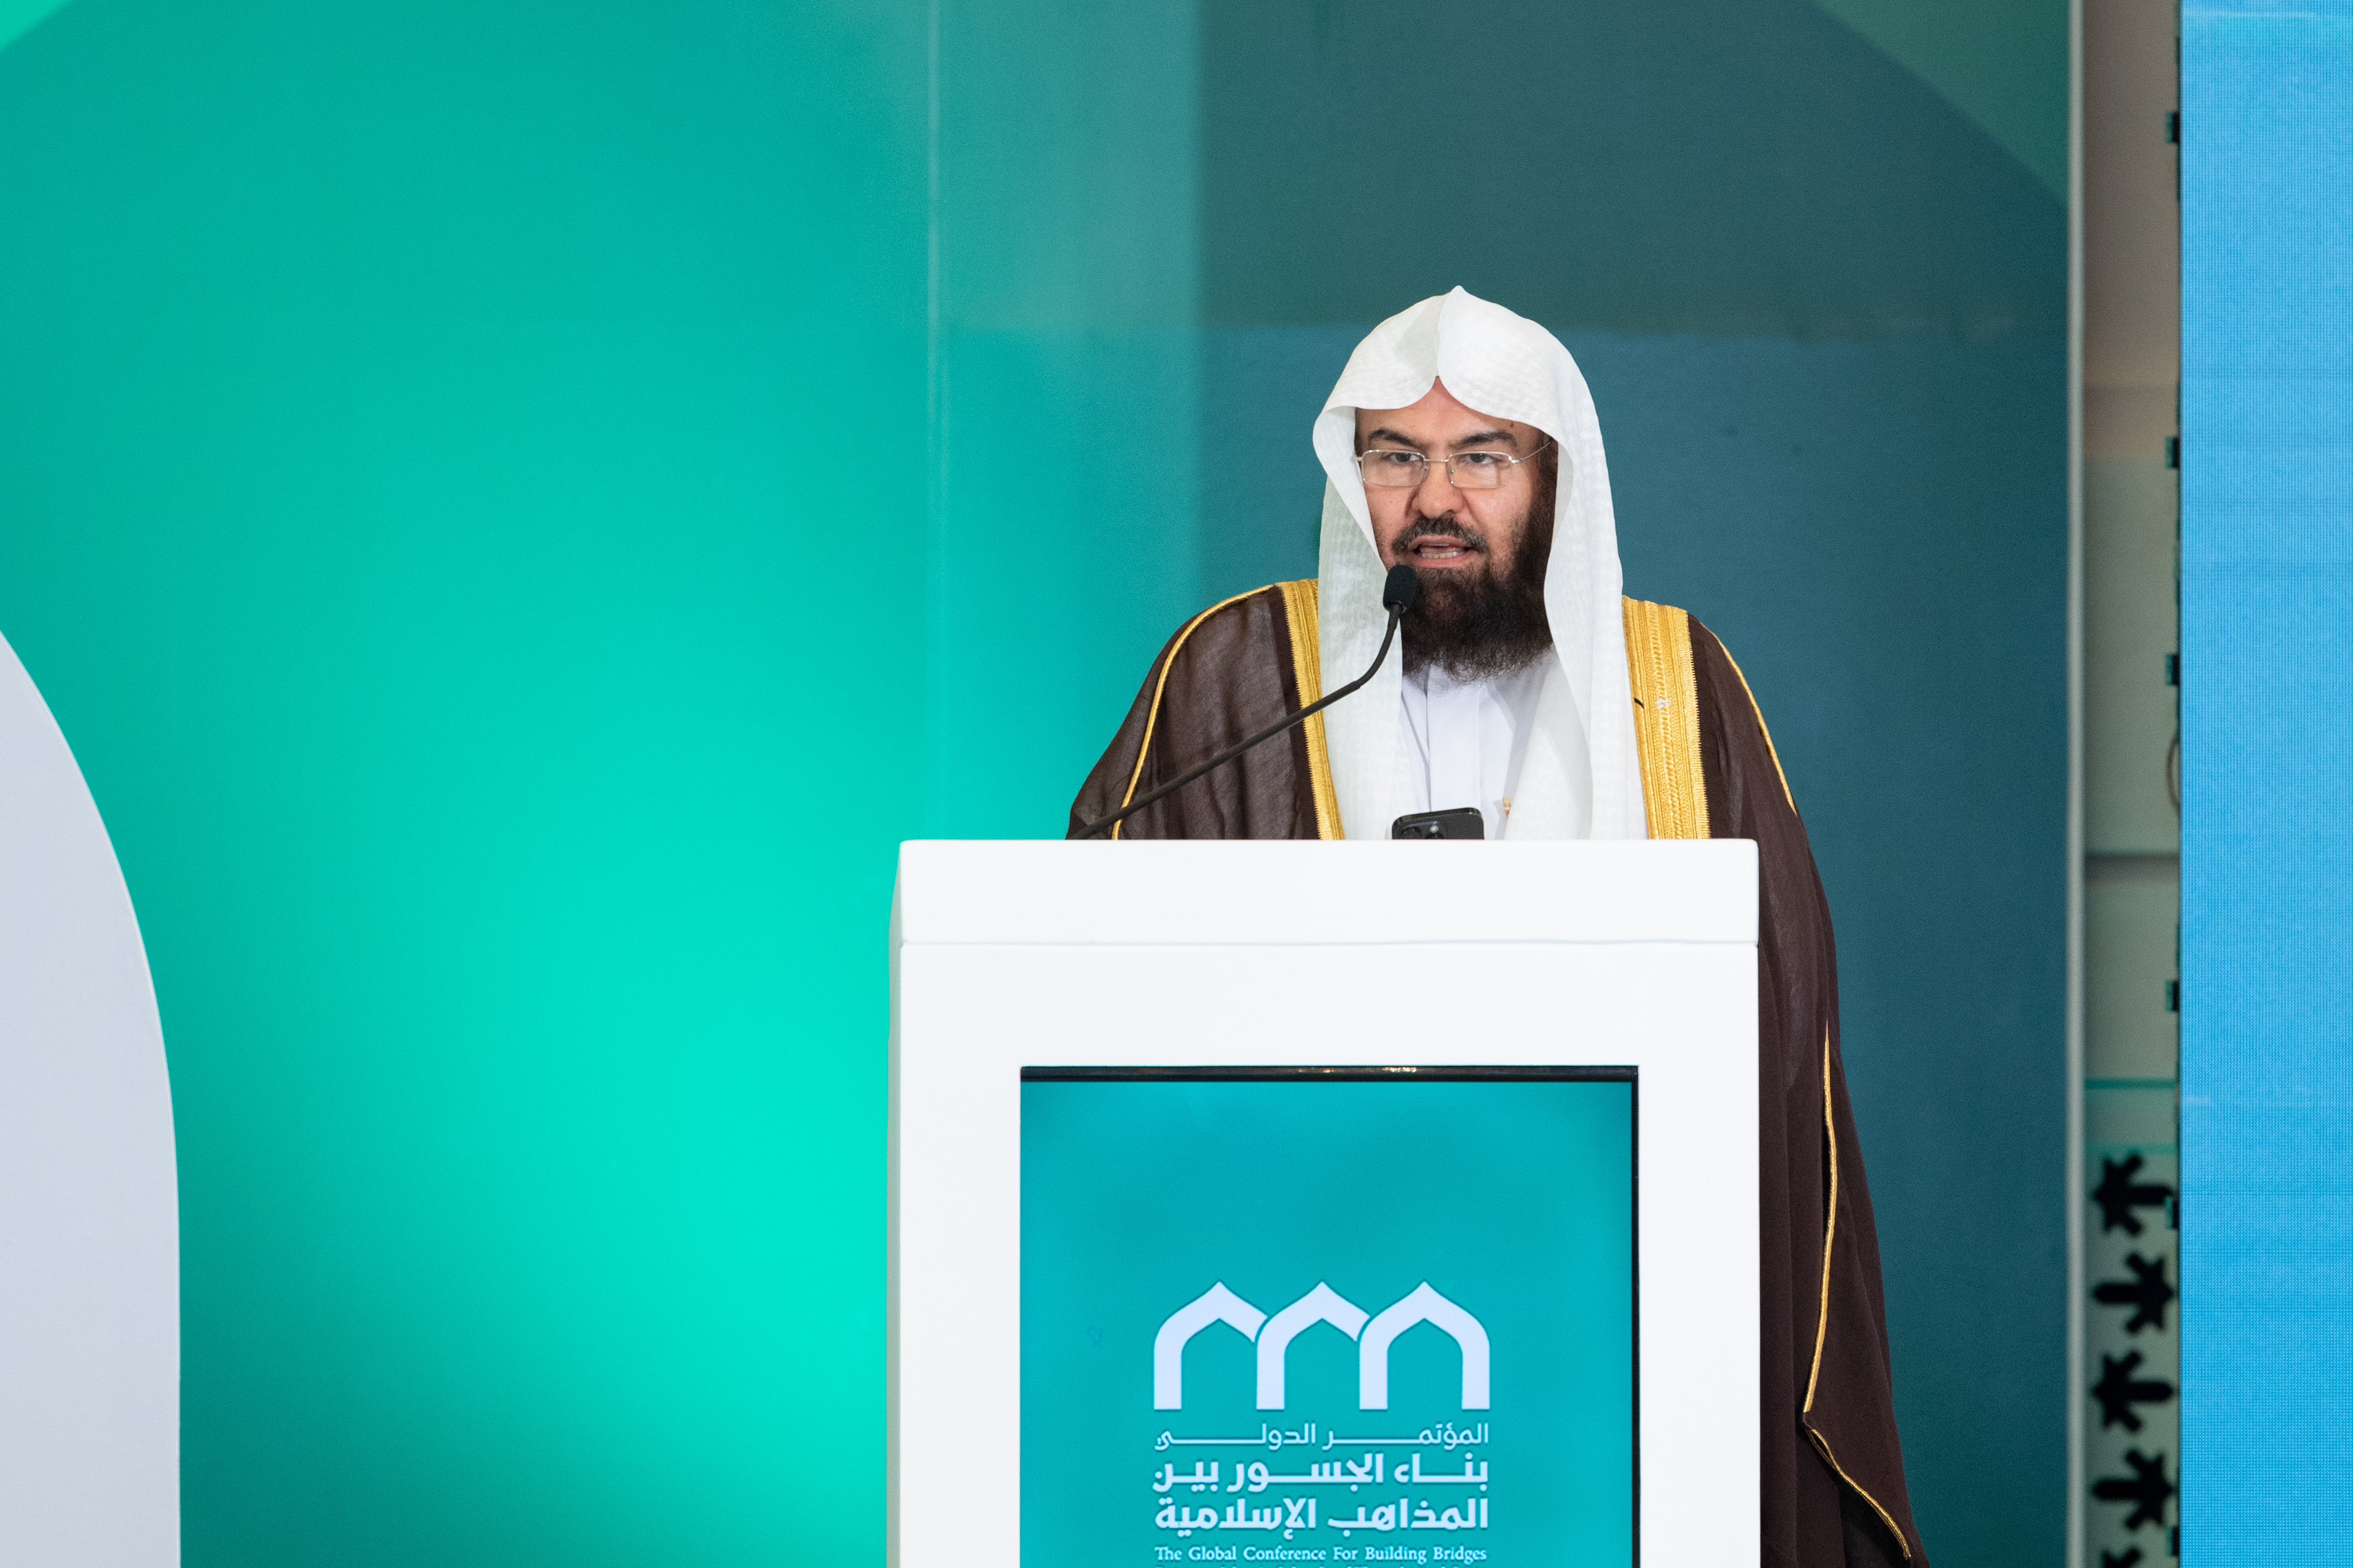 His Excellency Sheikh Dr. Abdul Rahman bin Abdulaziz Al-Sudais, Head of the Presidency of the Two Holy Mosques and Imam at the Grand Mosque, in his speech during the closing session at the Global Conference